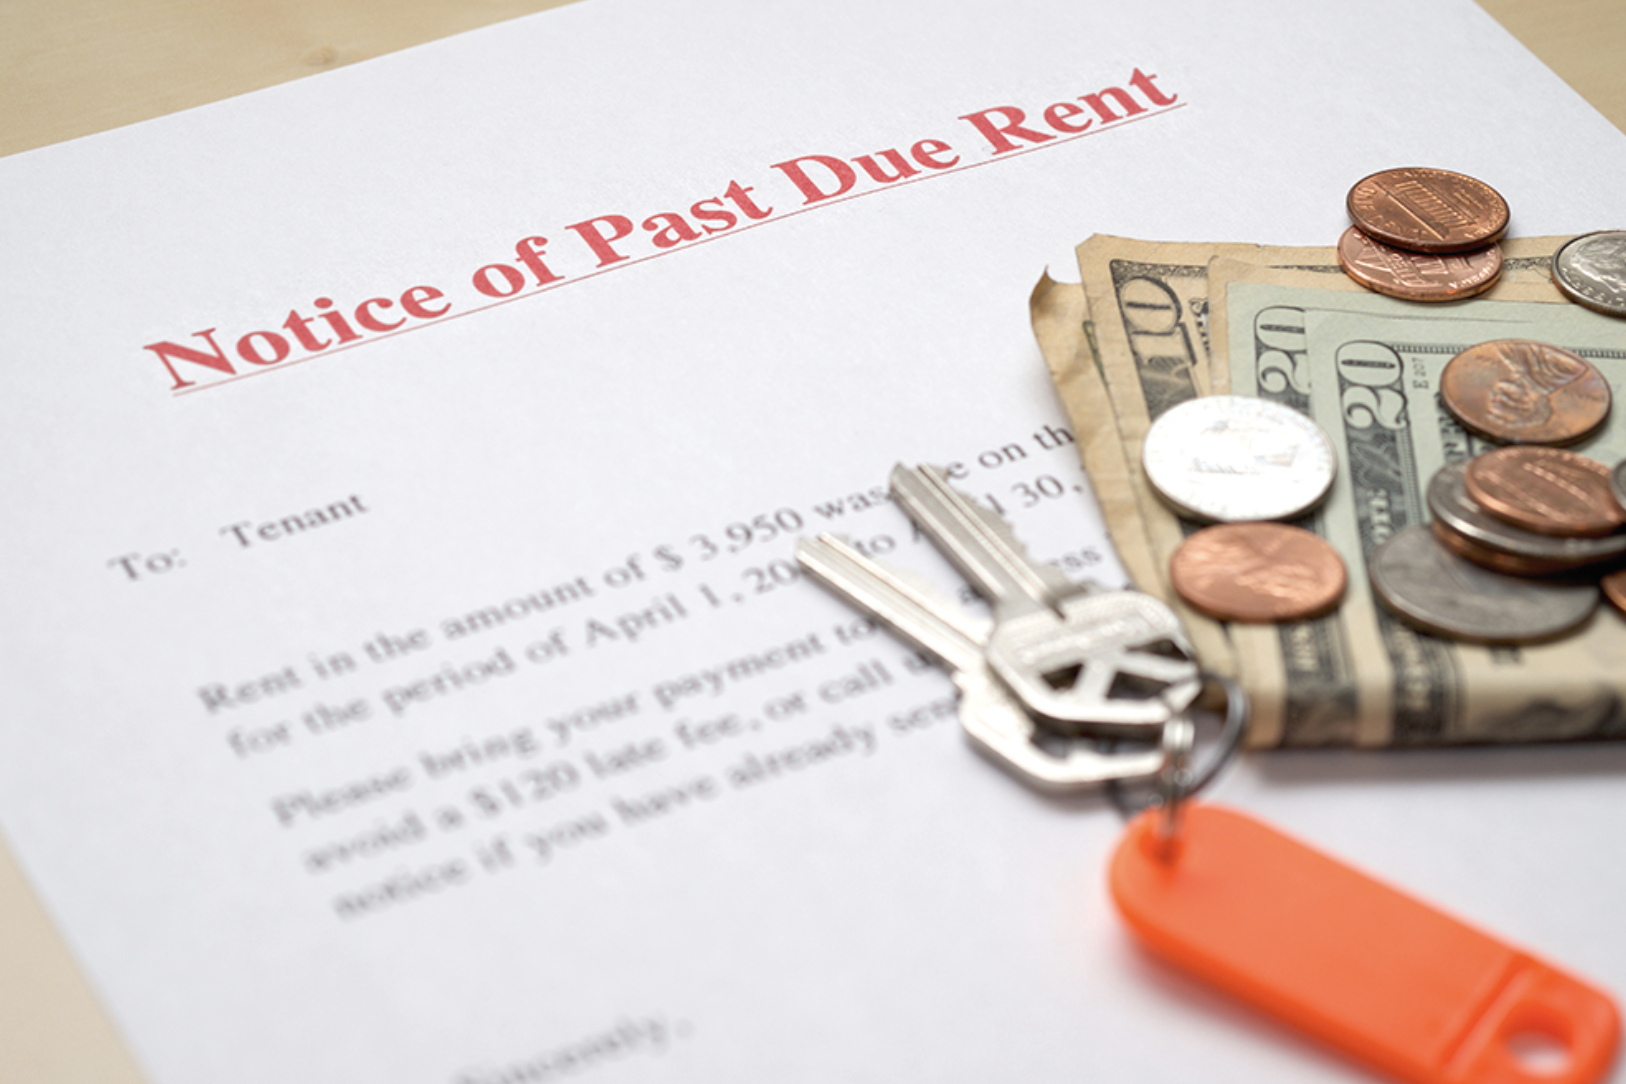 Renters Not Paying And Past Due Notices Piling Up